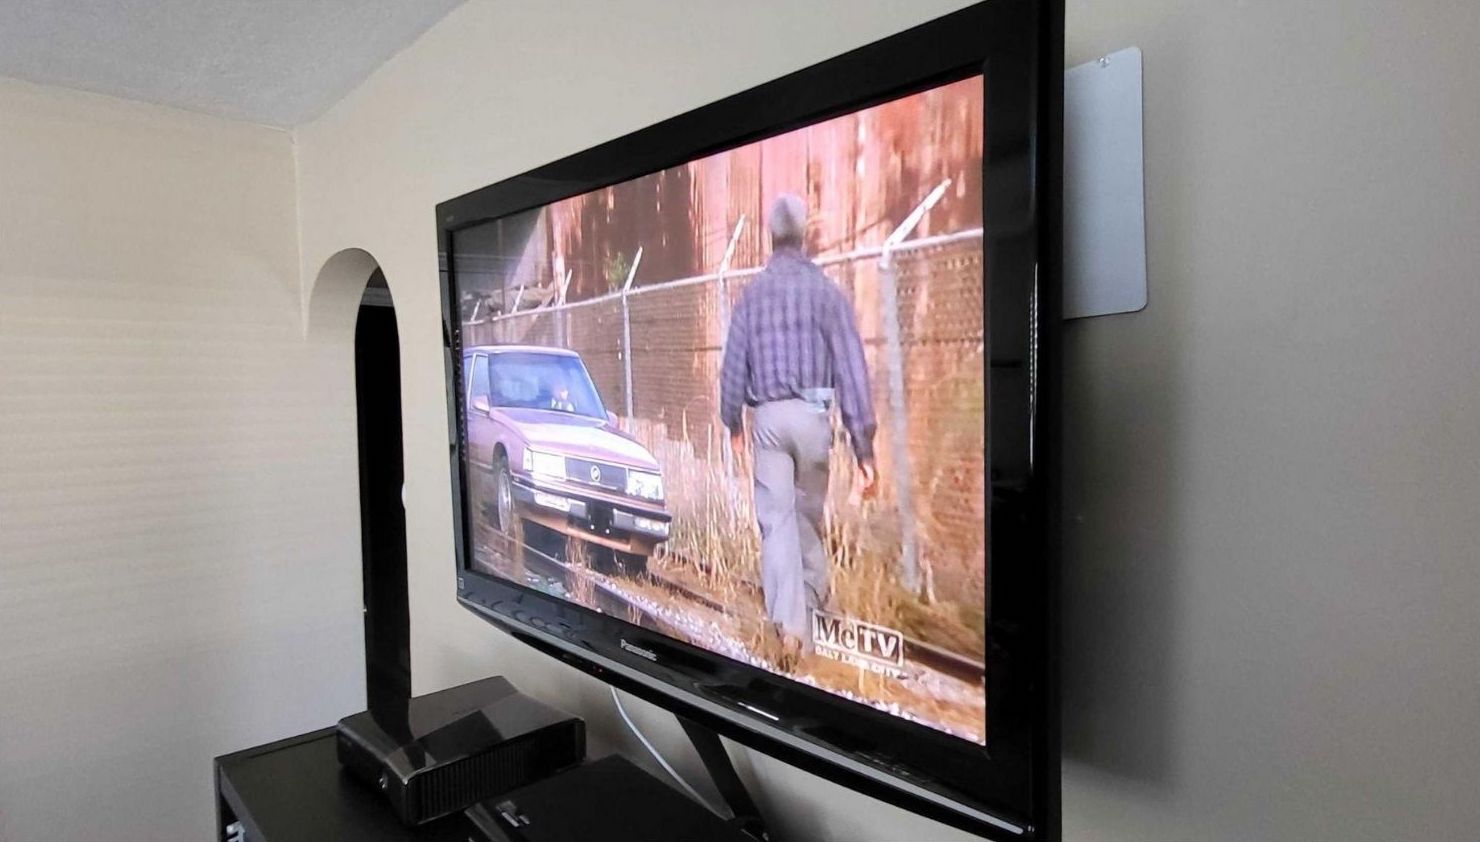 The Mohu Leaf 50 concealed behind a wall-mounted TV.